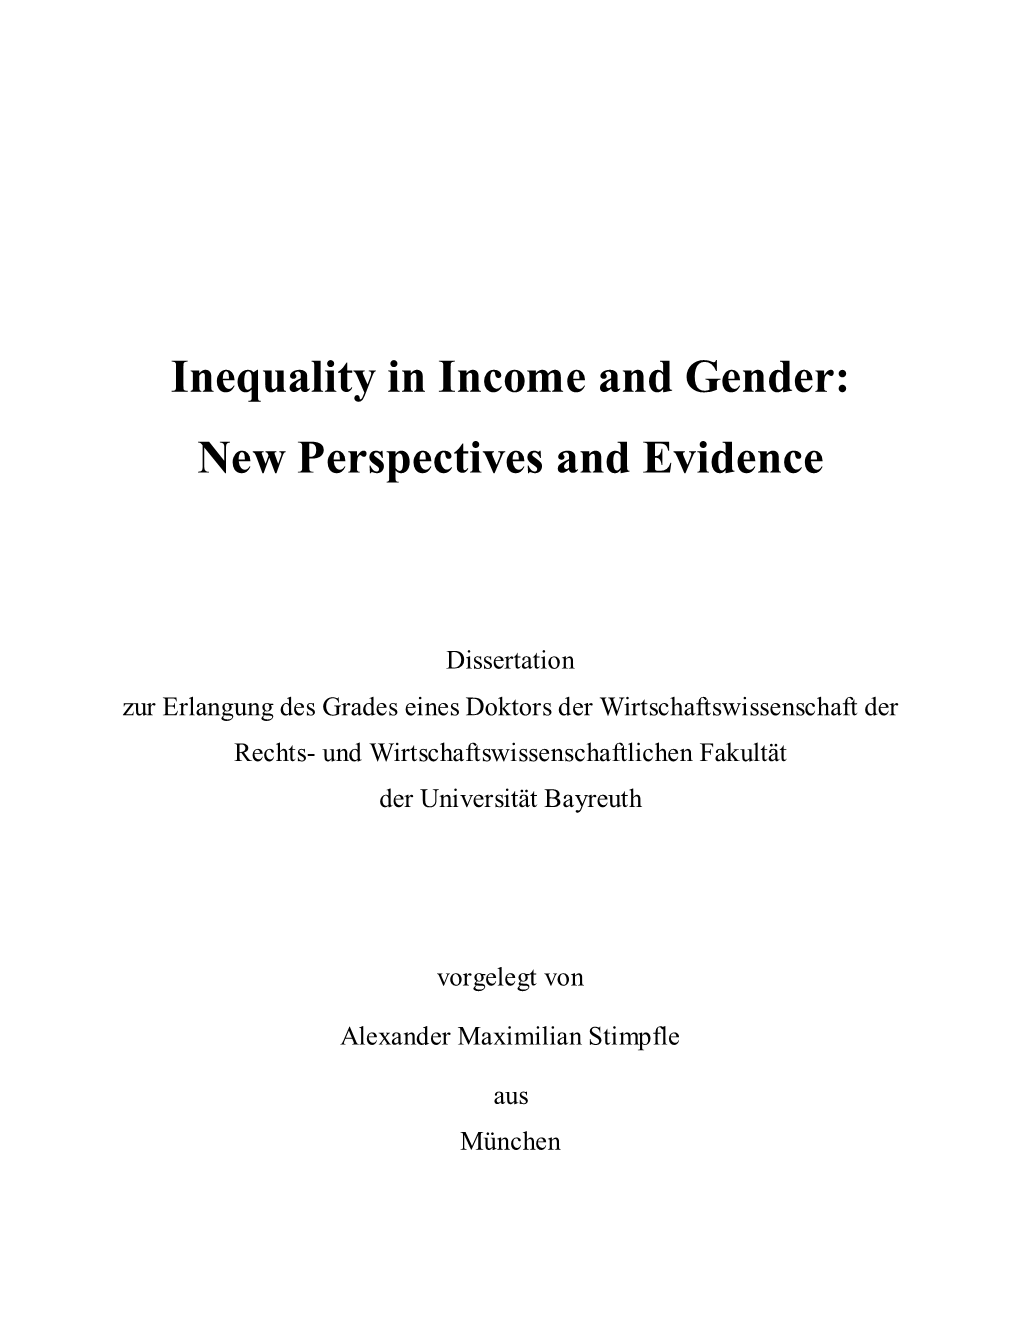 Inequality in Income and Gender: New Perspectives and Evidence